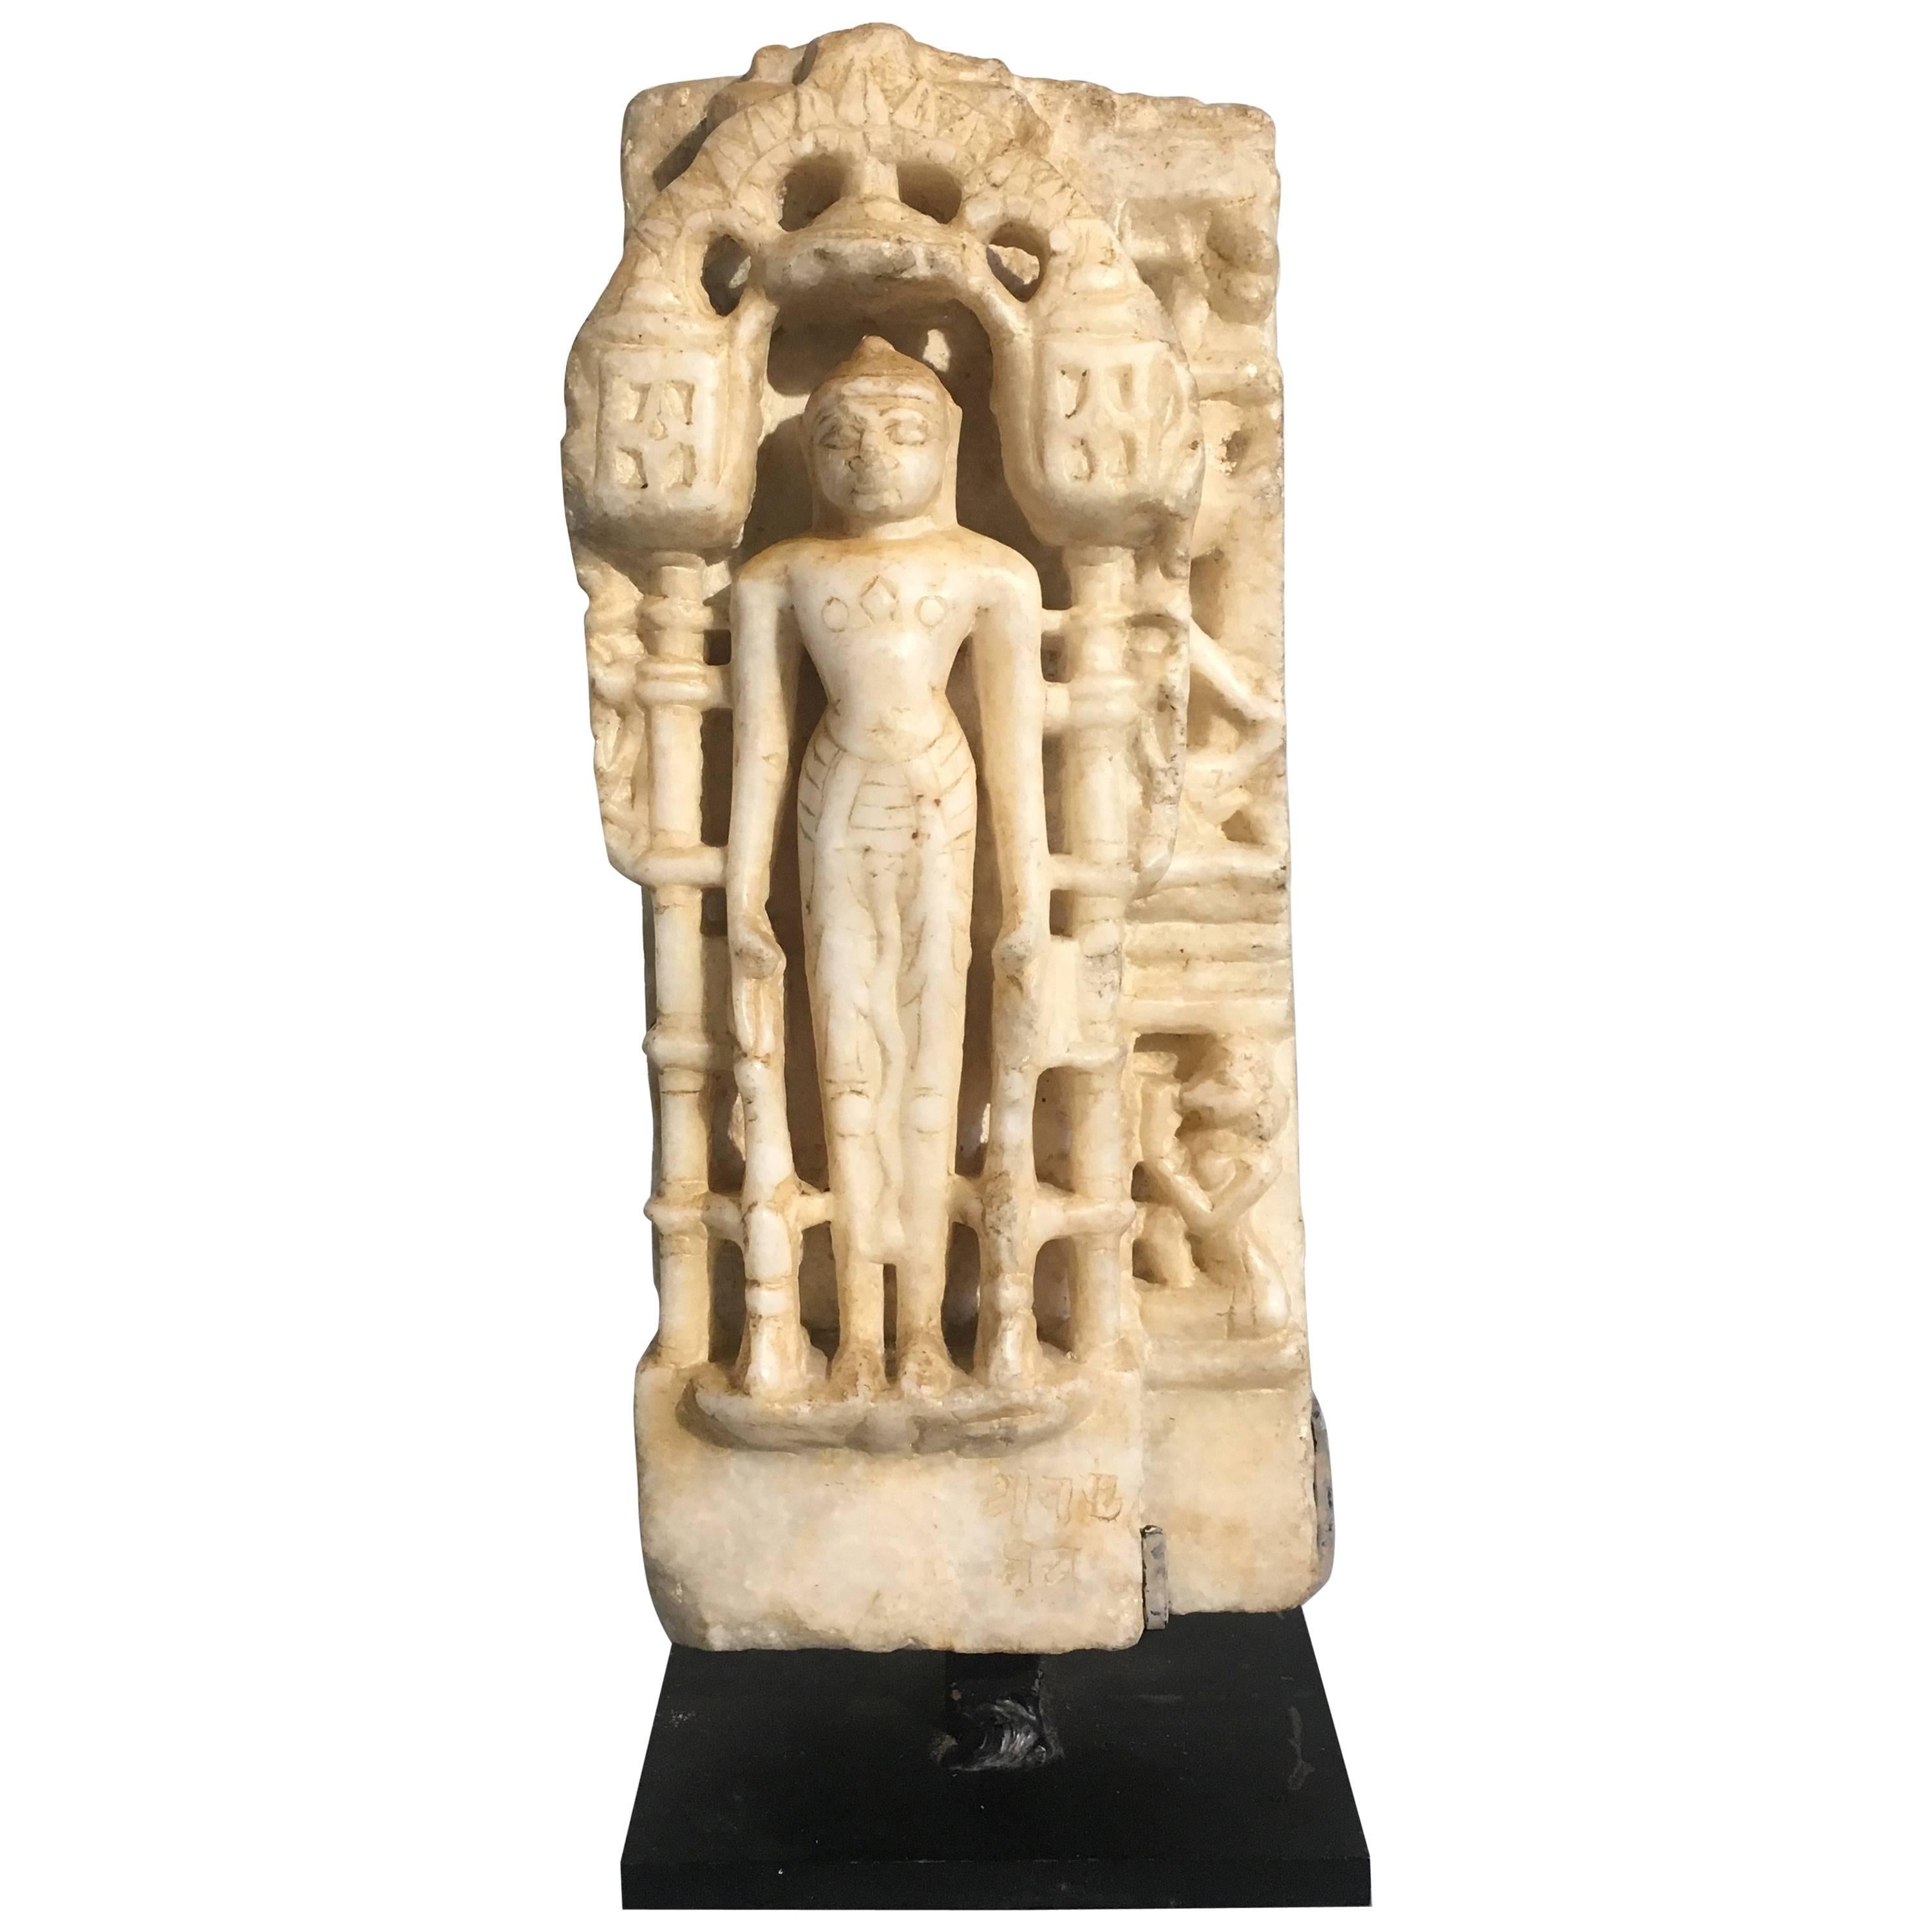 12th Century Indian Carved White Marble Figure of a Jain Tirthankara or Jina